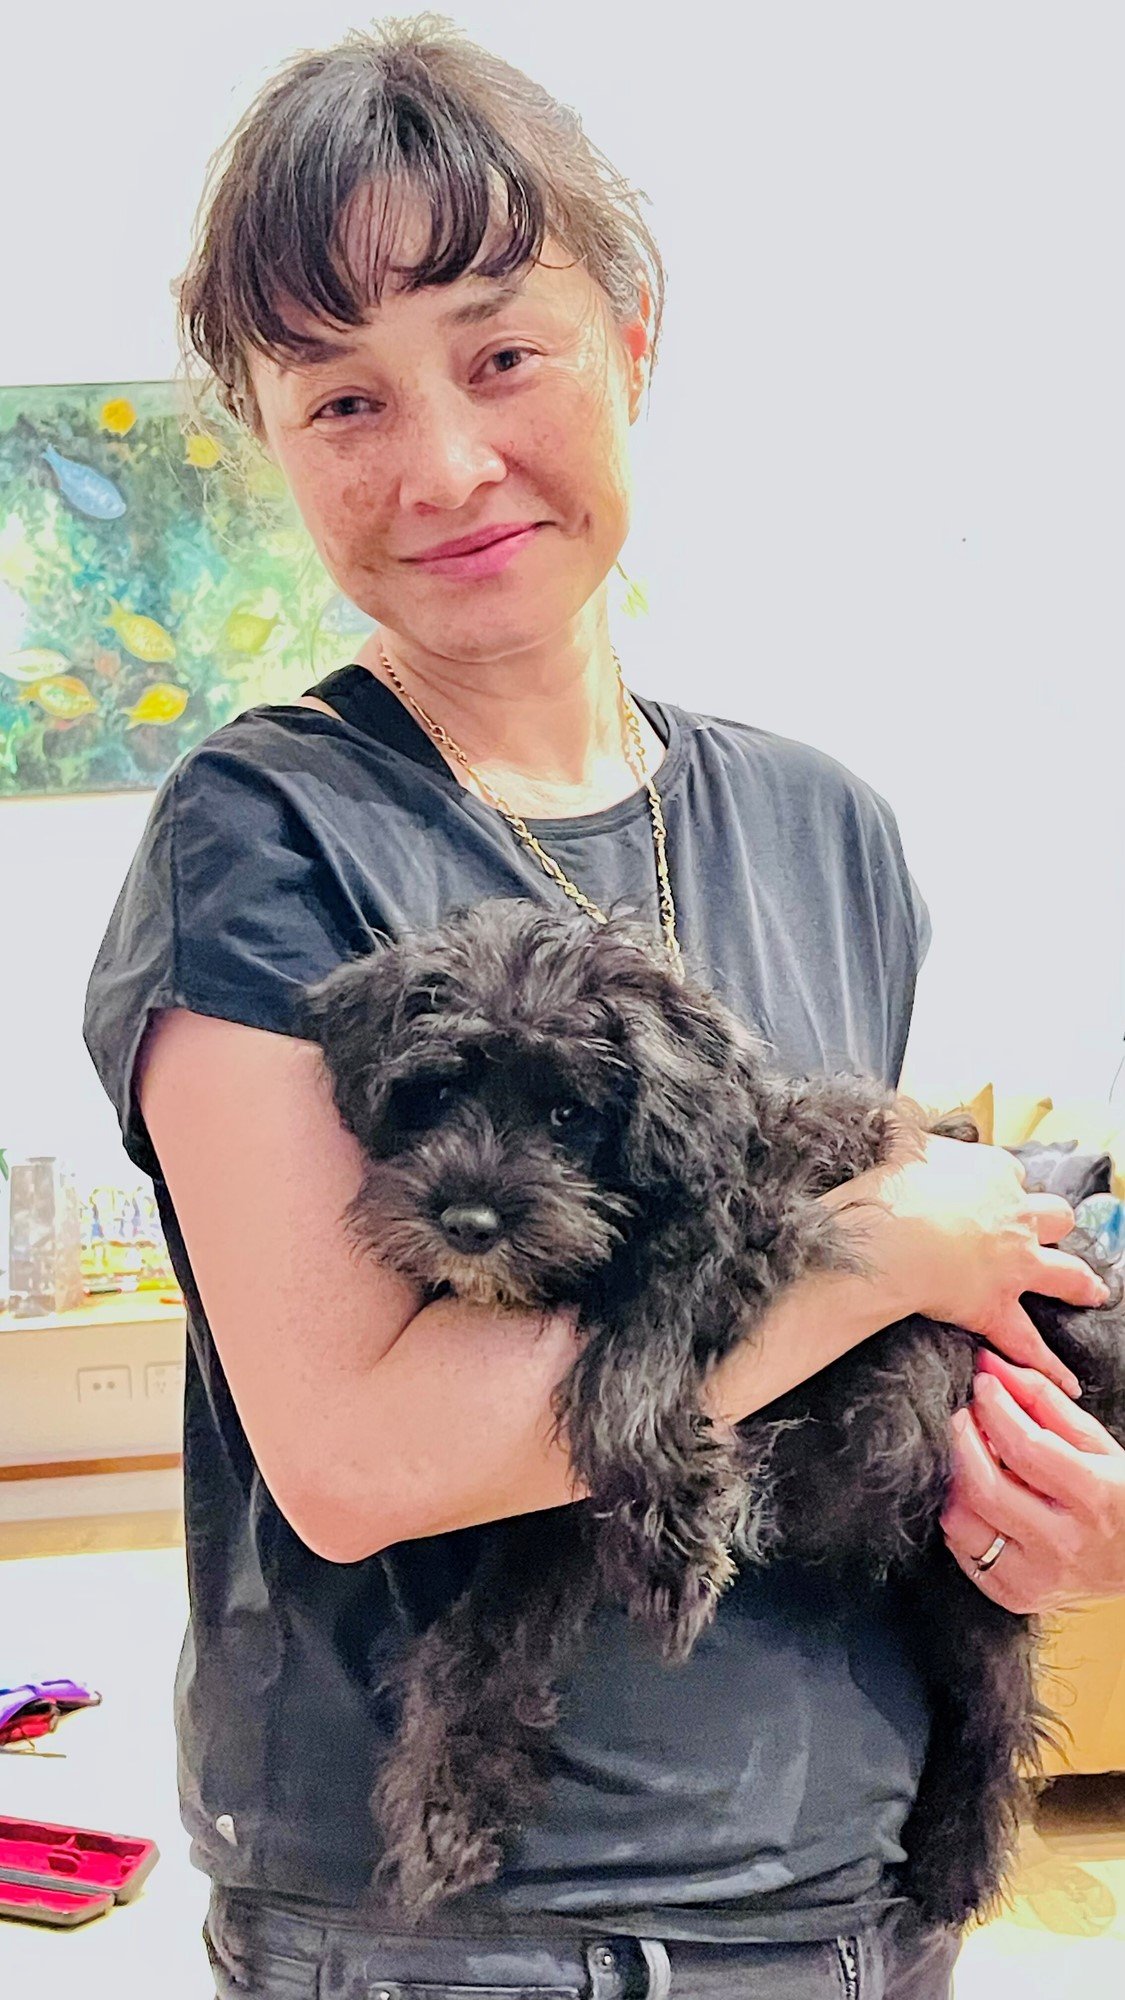 A woman holding her dog.